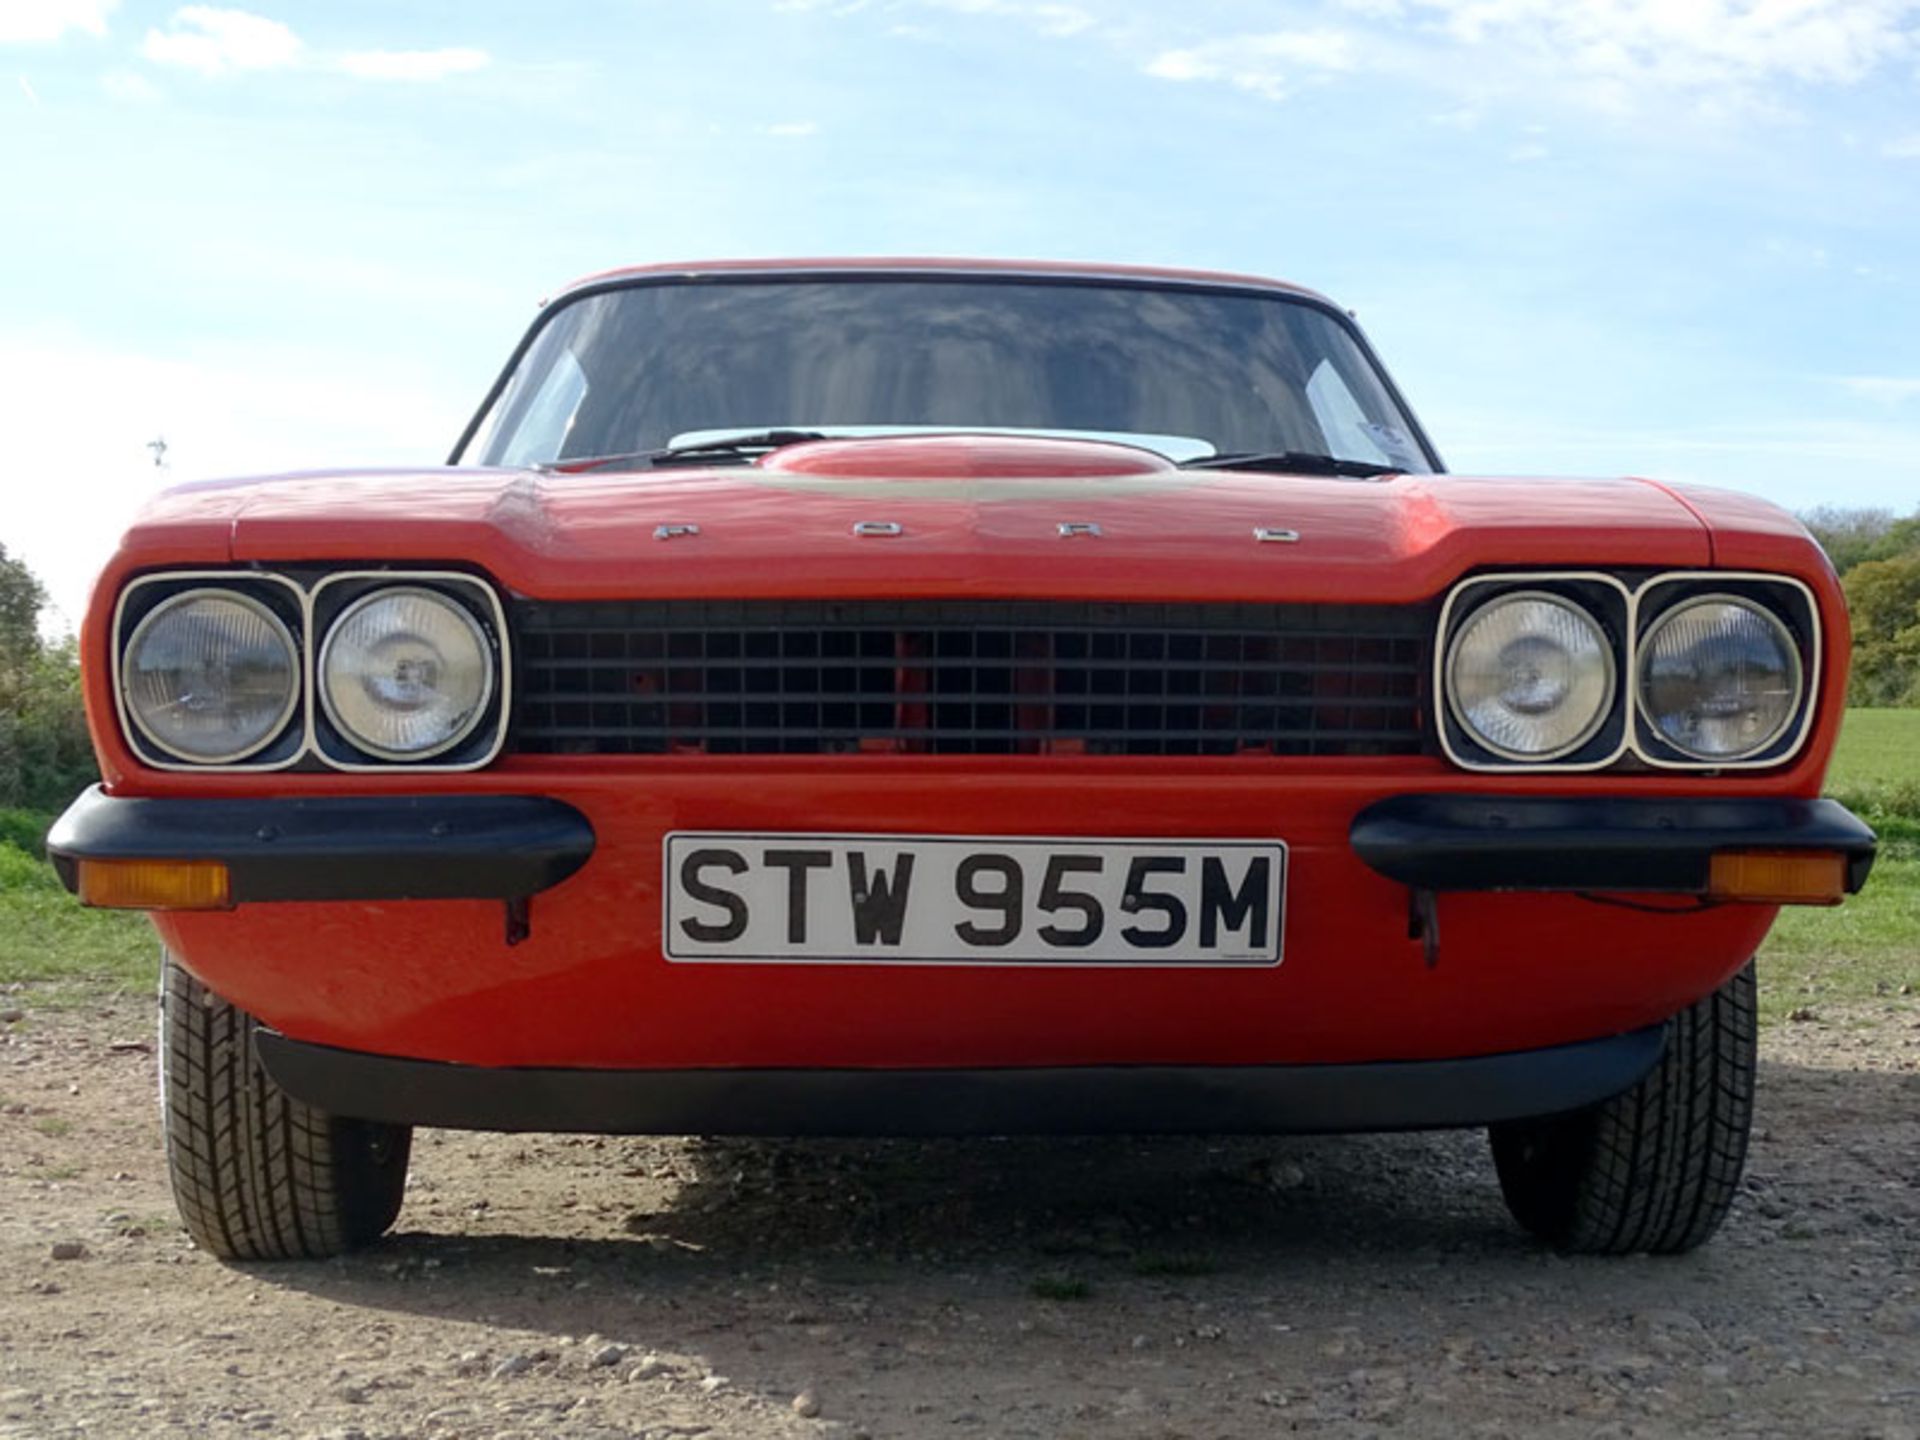 1974 Ford Capri RS 3100 - Image 2 of 10